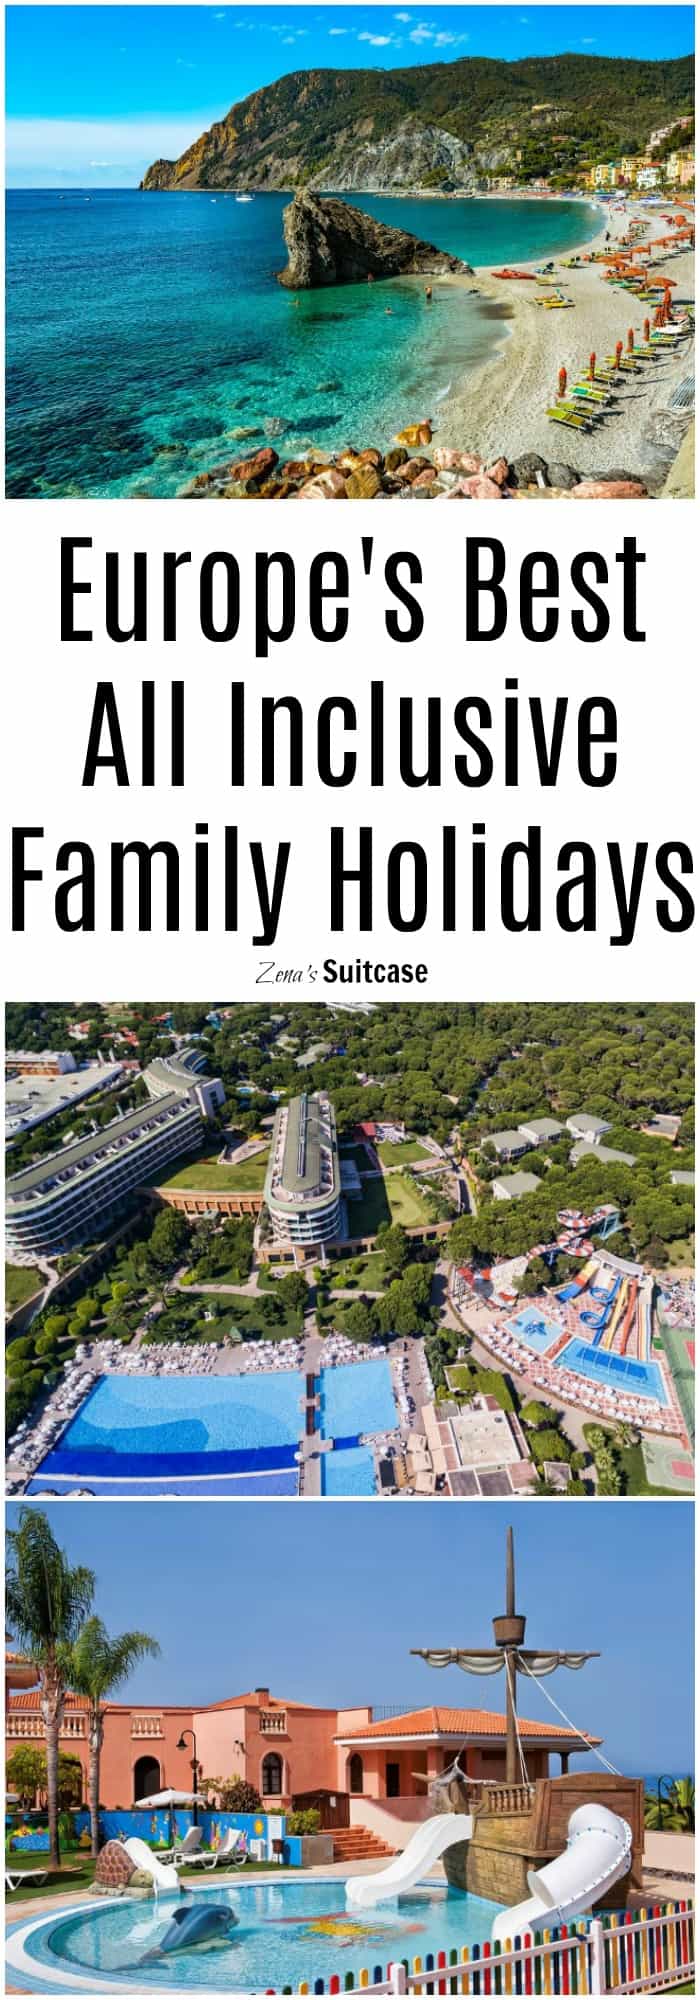 Europe's Best All Inclusive Family Holidays